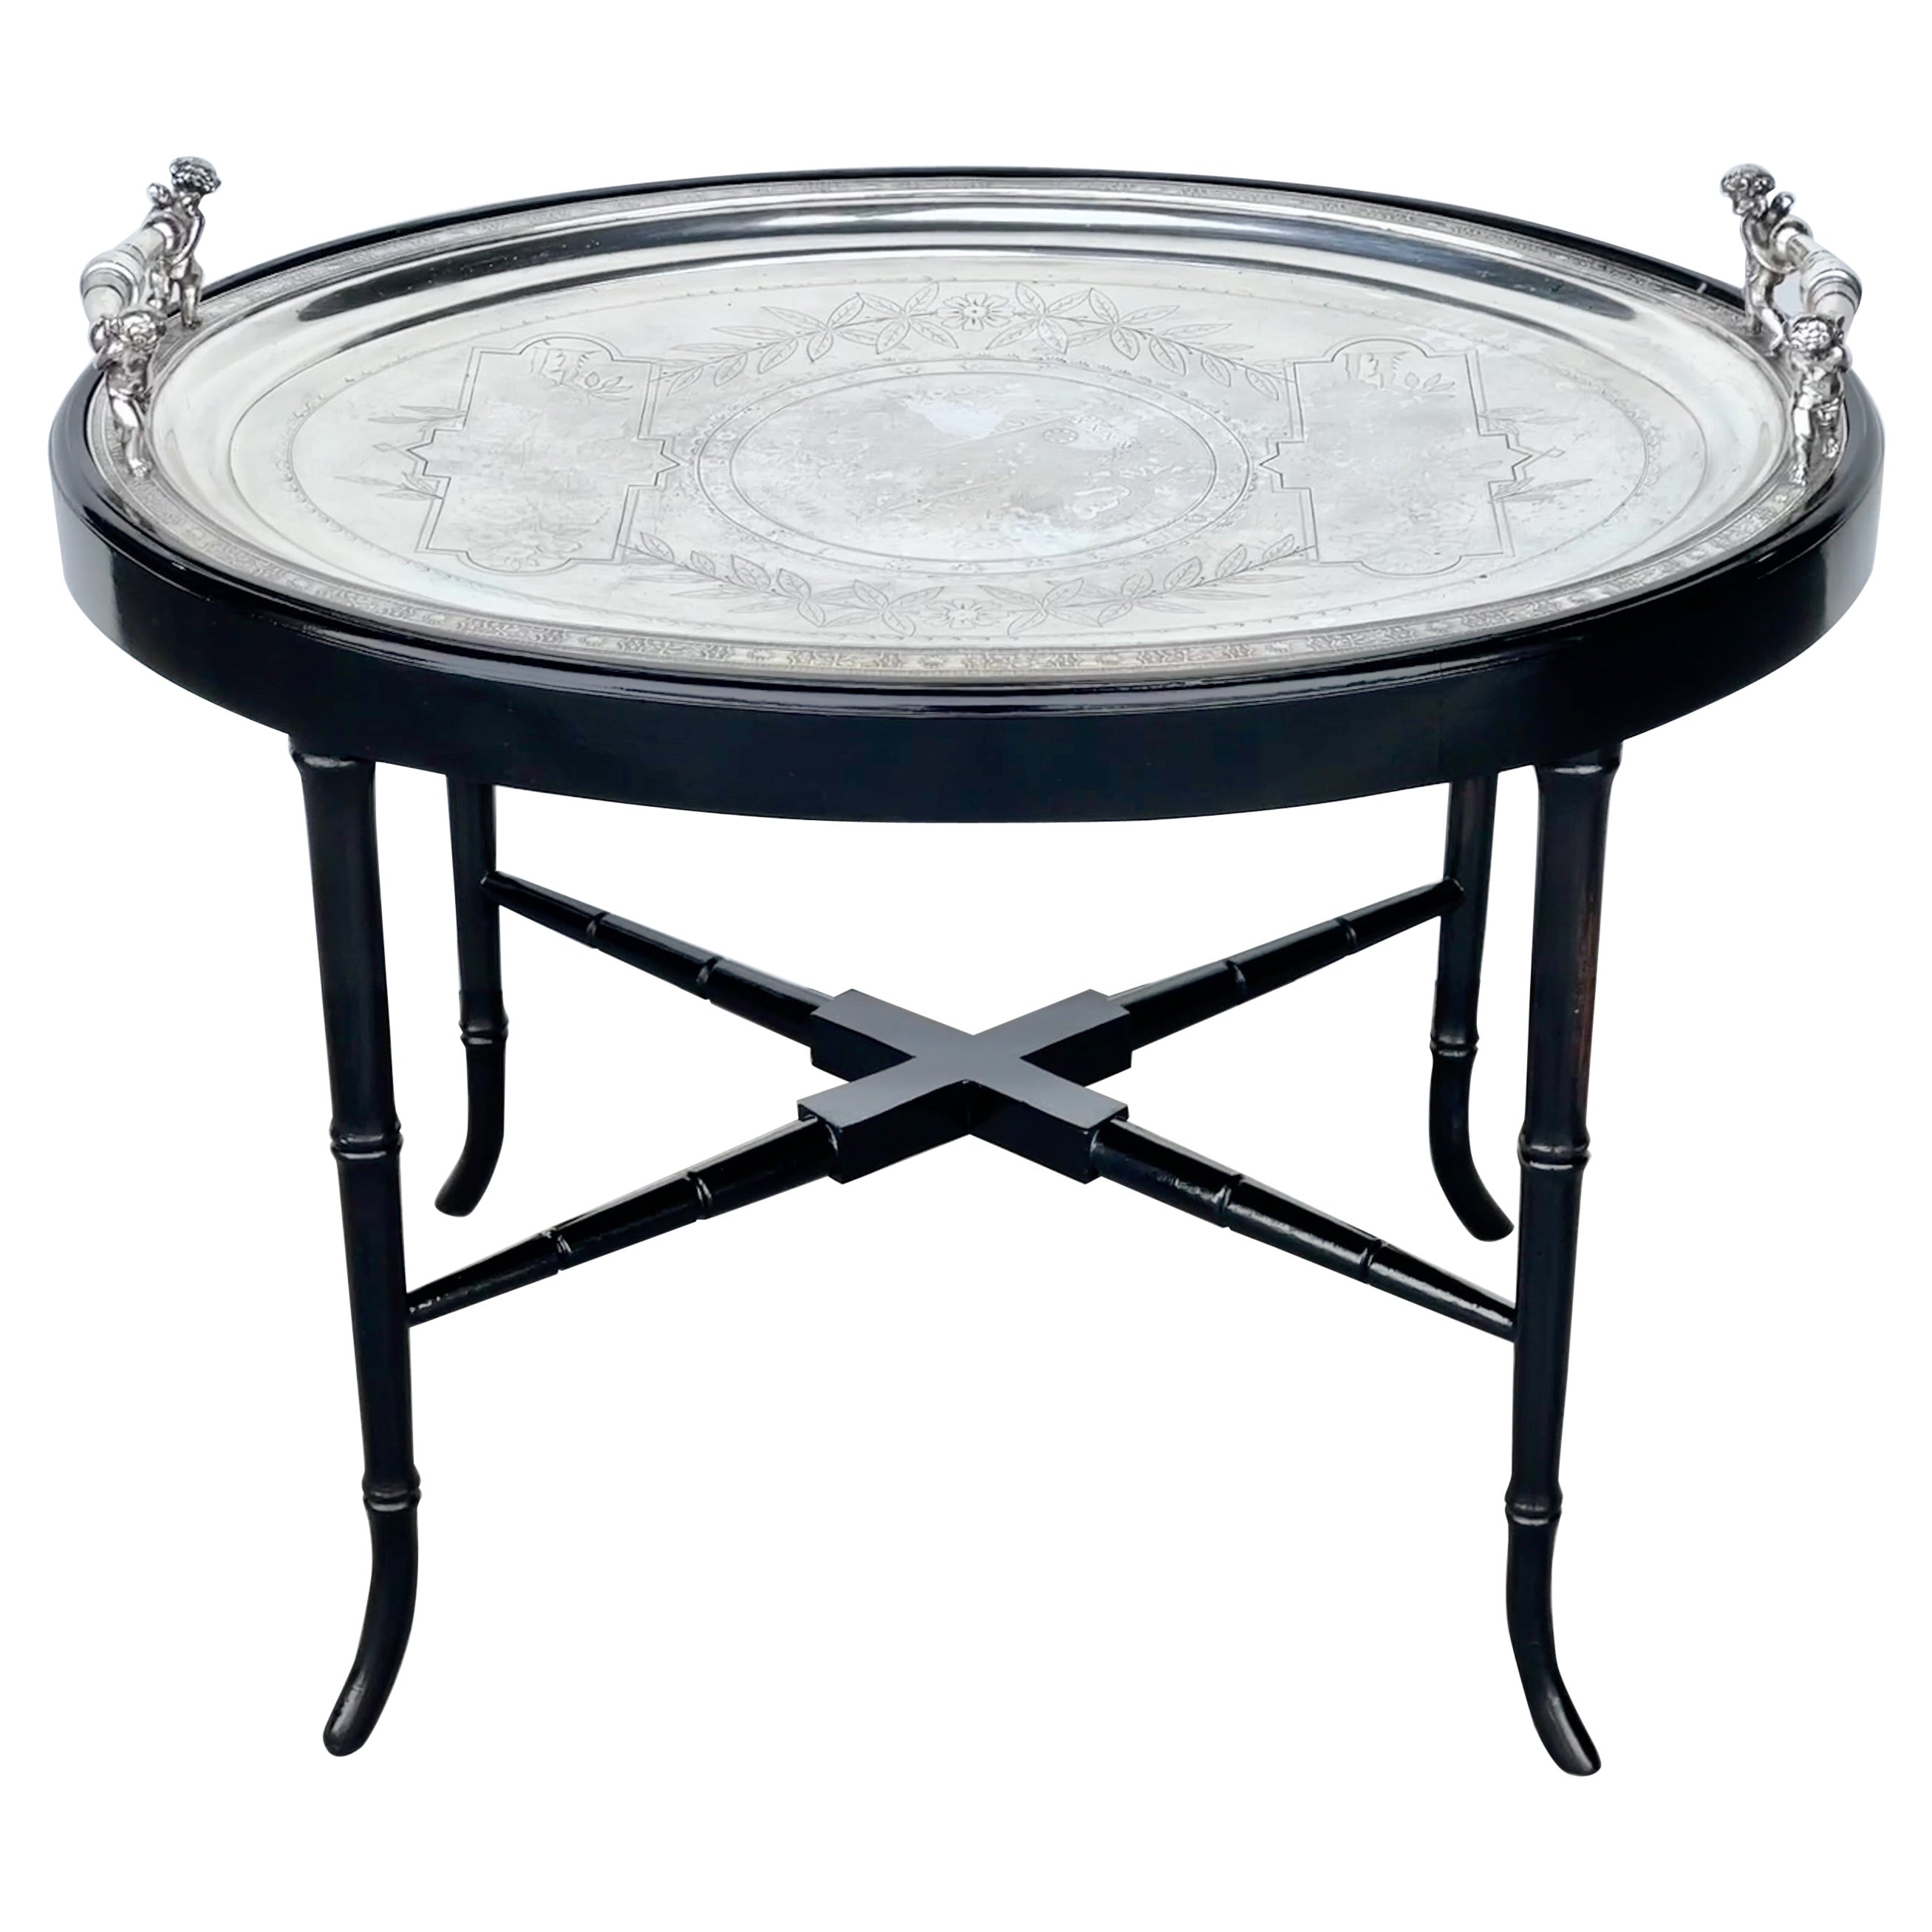 Simpson Hall Miller Oval Silver Plate Tray Table For Sale